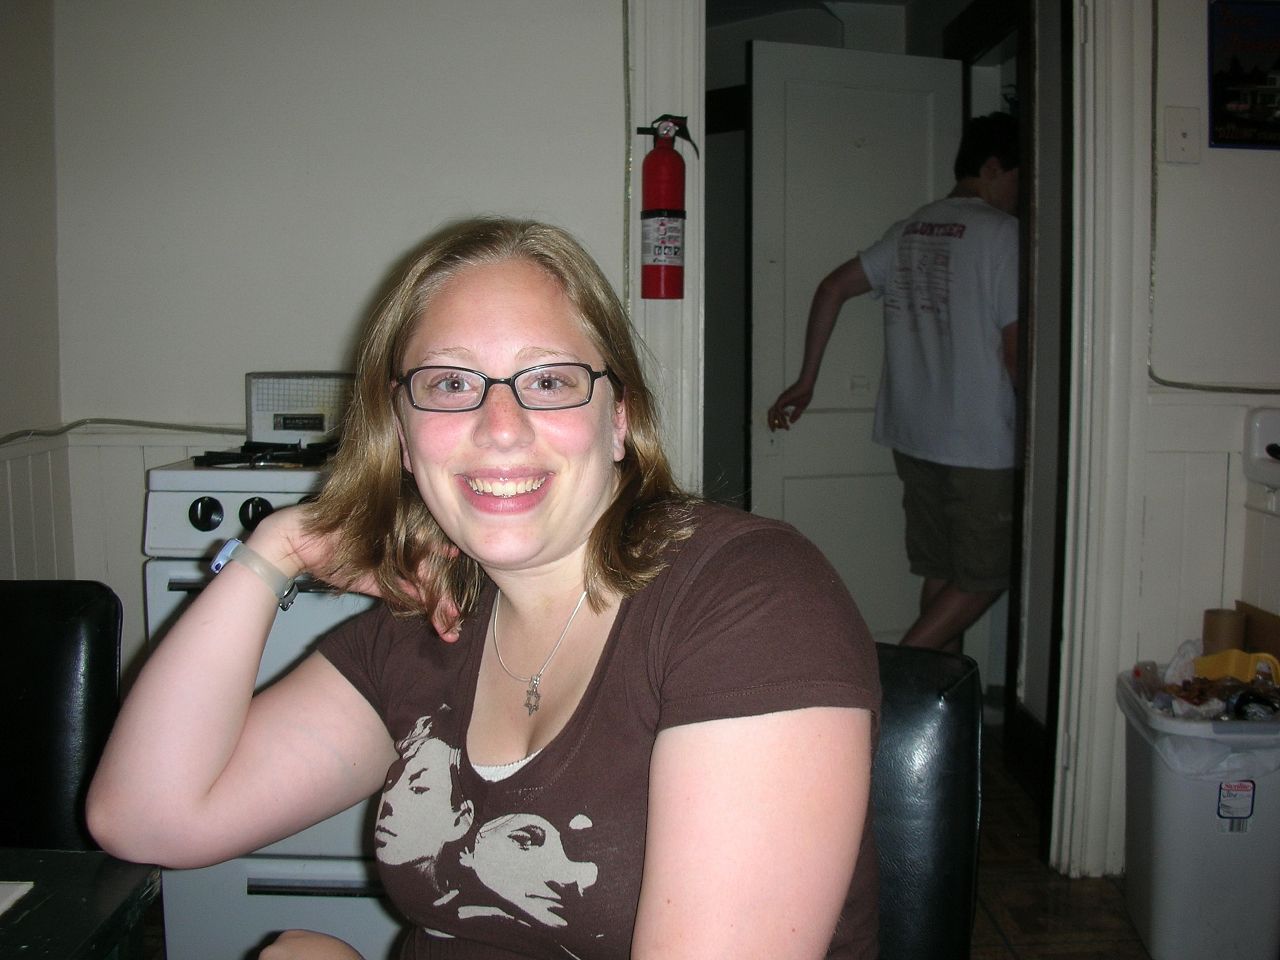 a woman sitting in a kitchen smiling at the camera